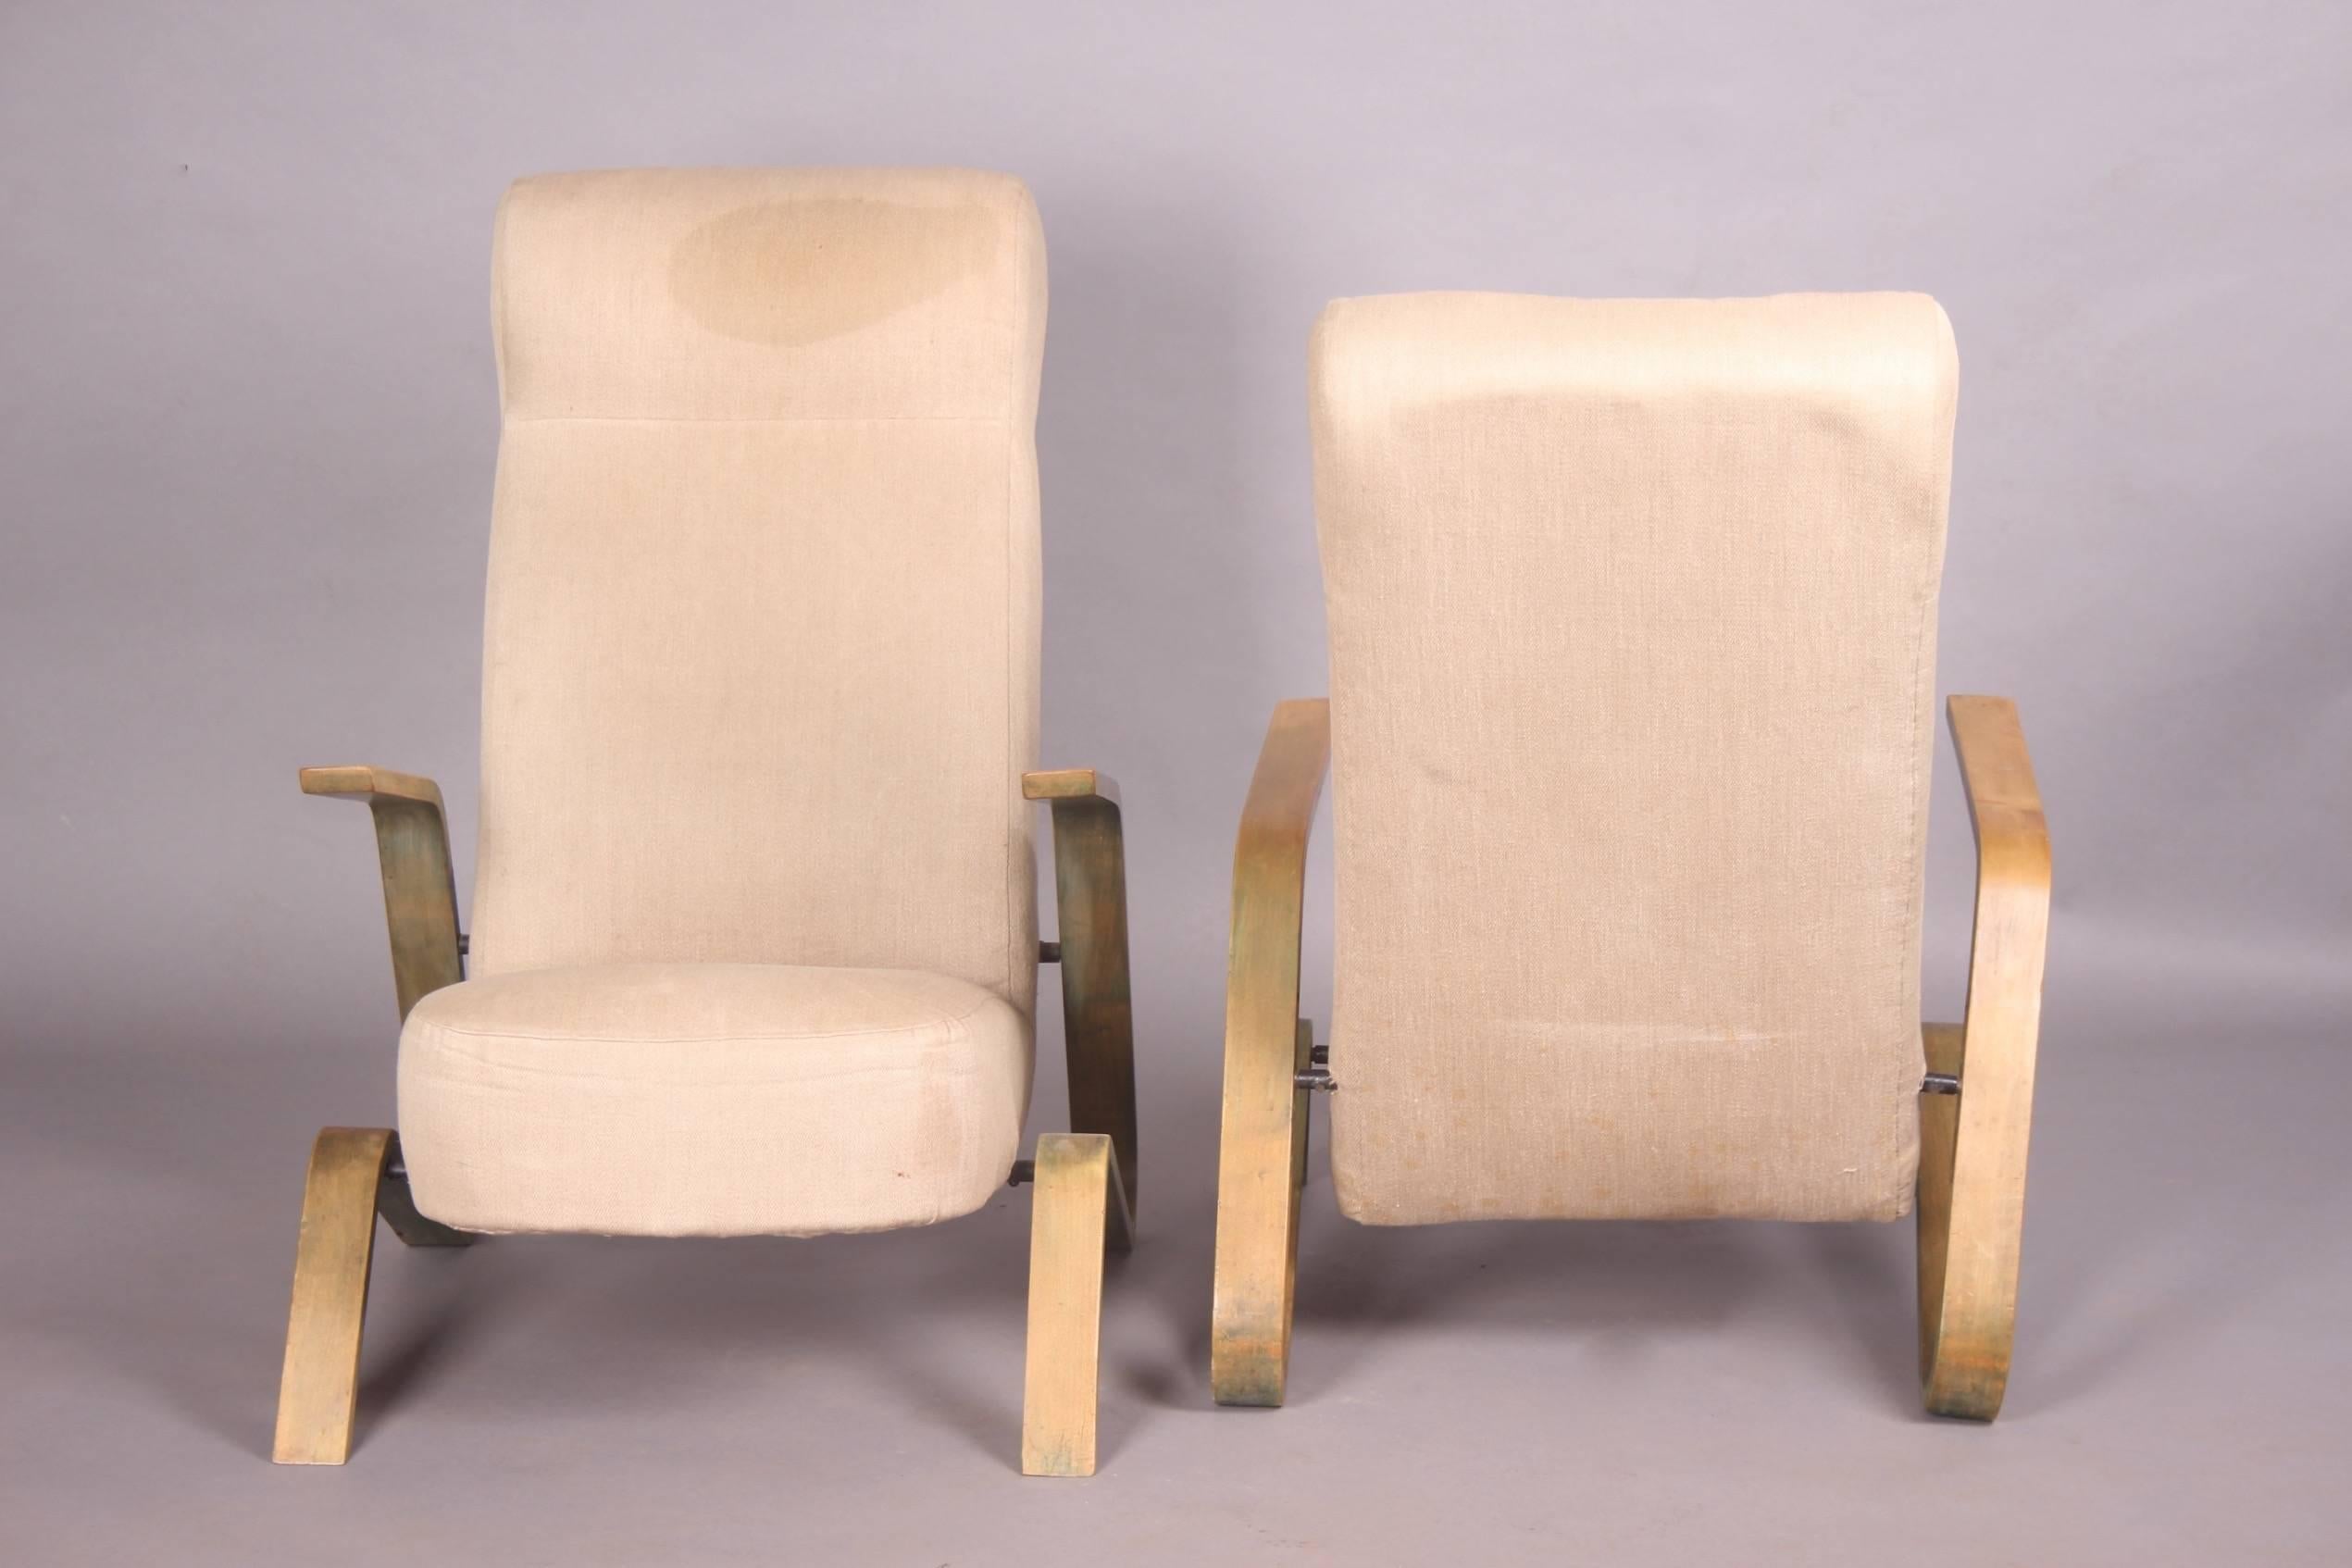 Pair of Grasshopper Chairs for the Zurich Airport 3